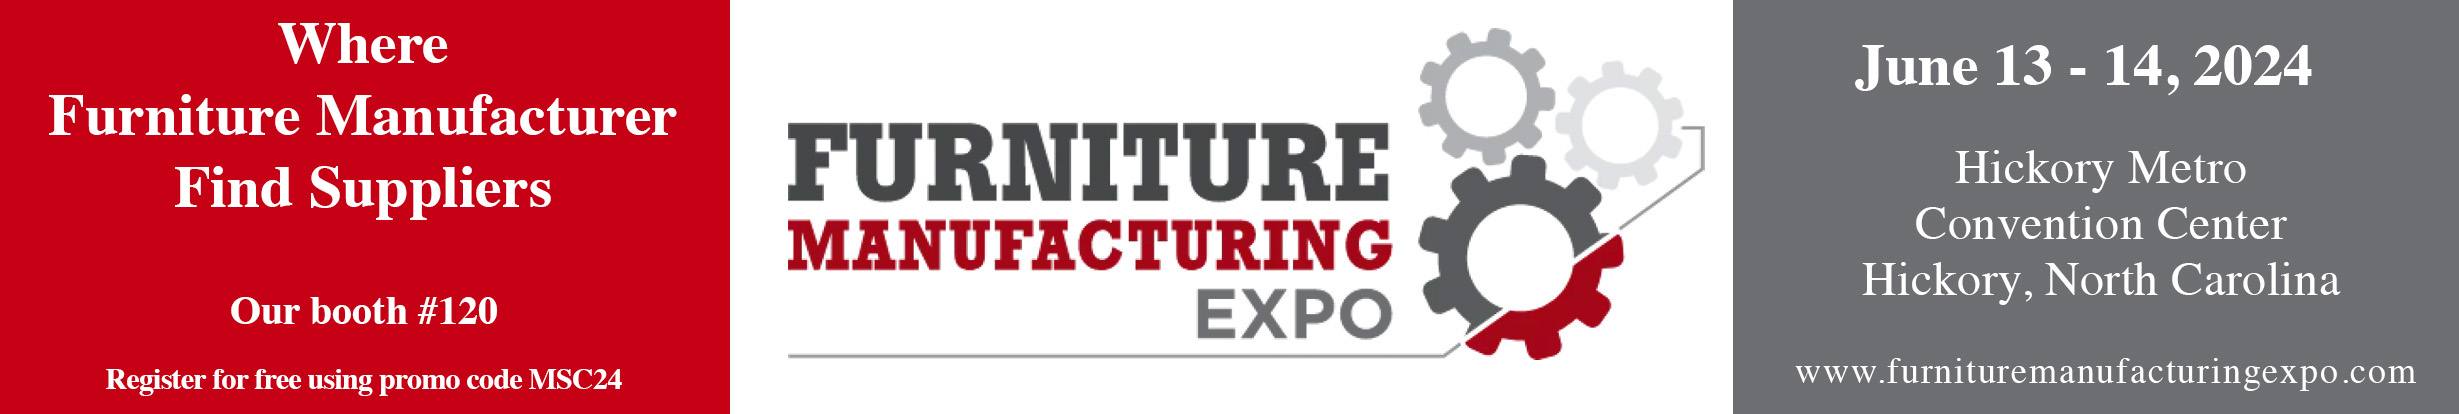 2024 Furniture Manufacturing Expo in Hickory NC